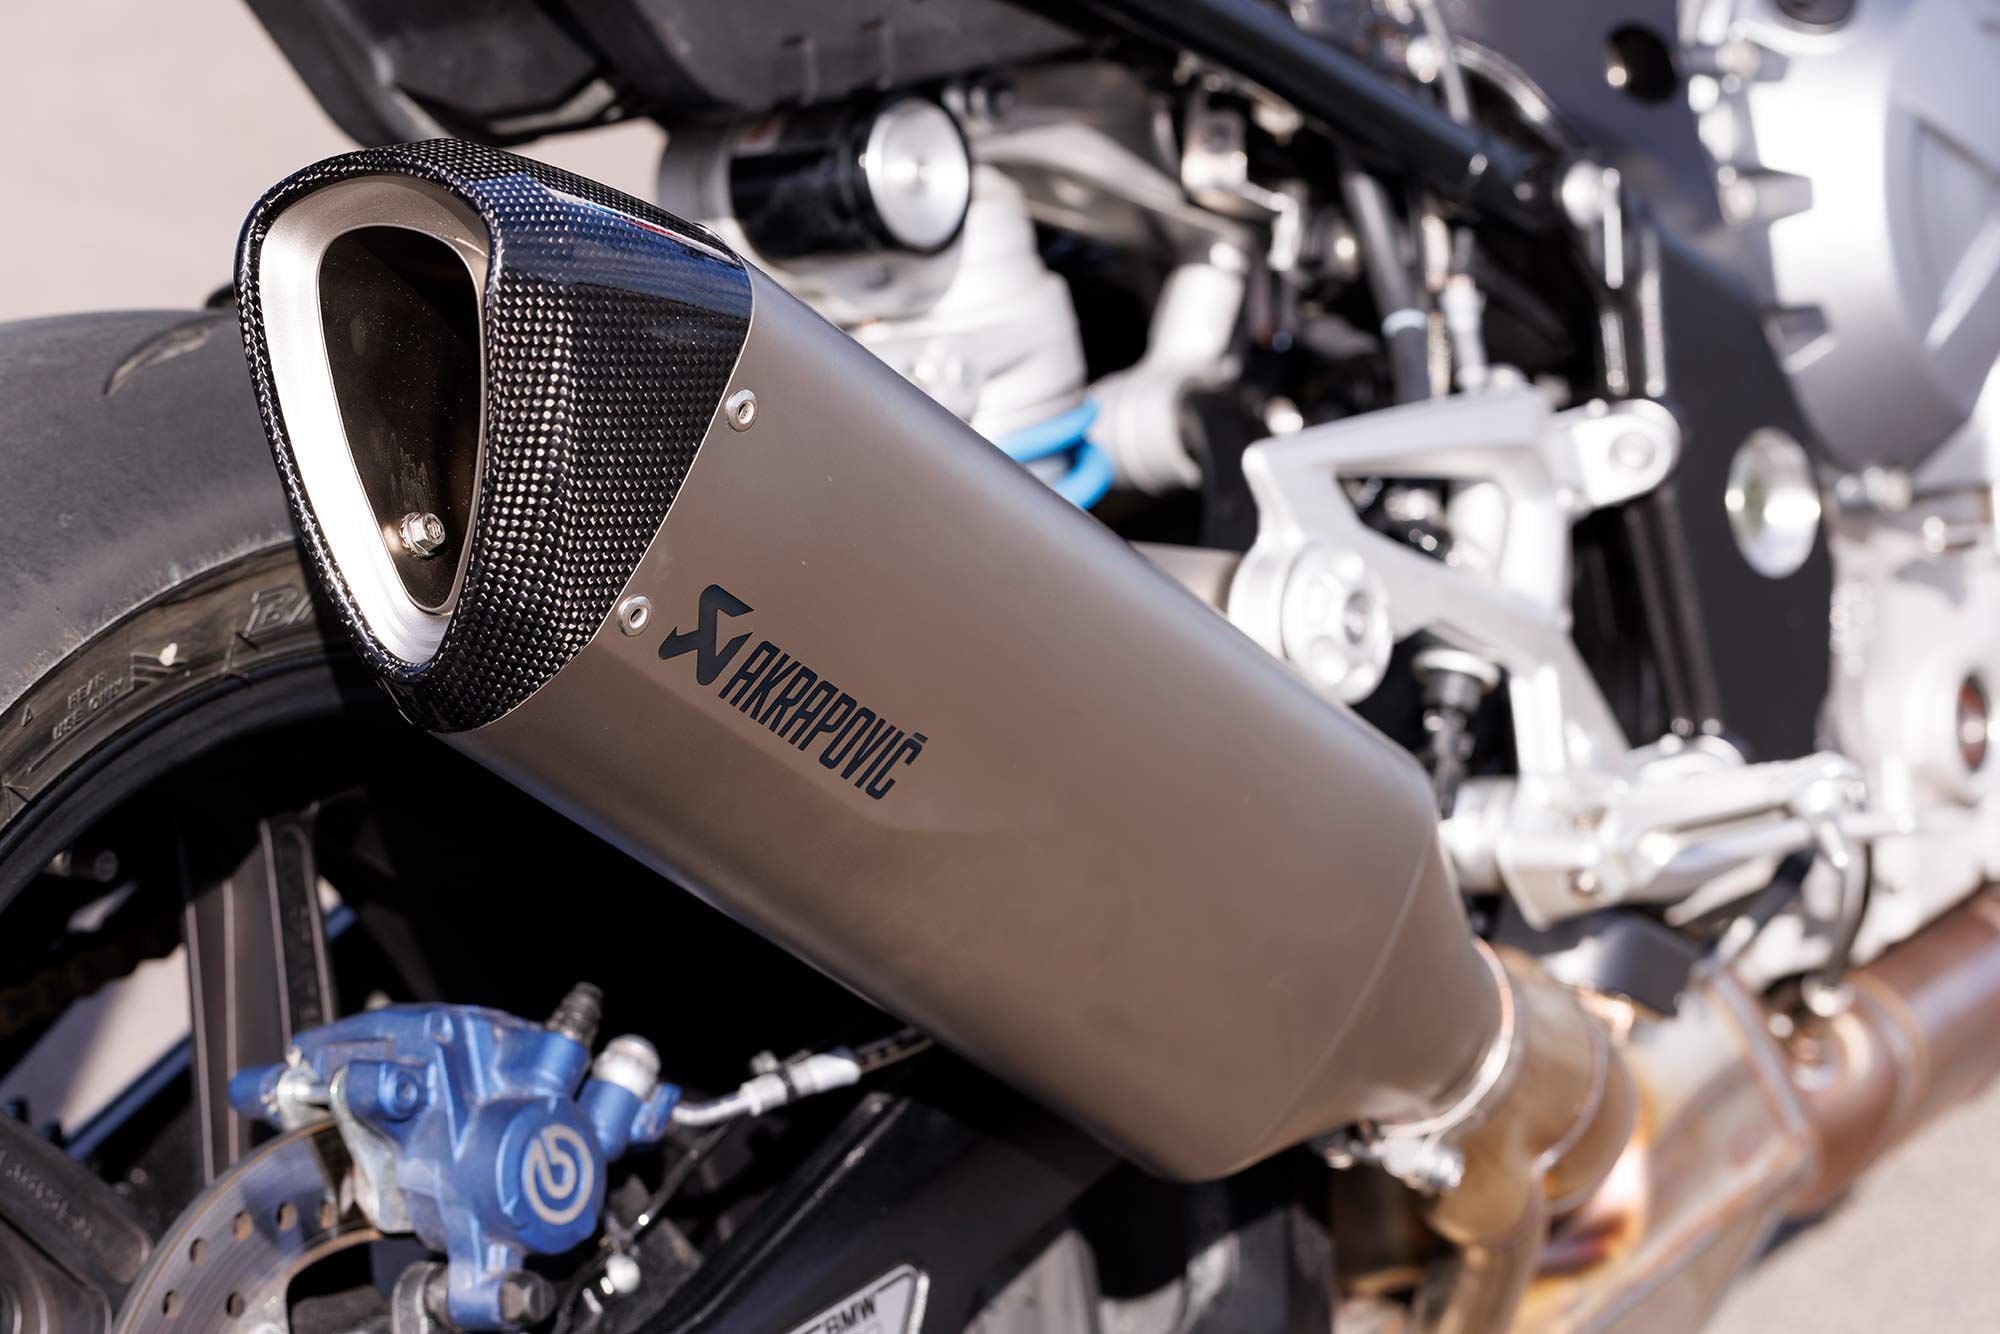 The titanium Akrapovič exhaust silencer not only looks fantastic, it sounds equally so.